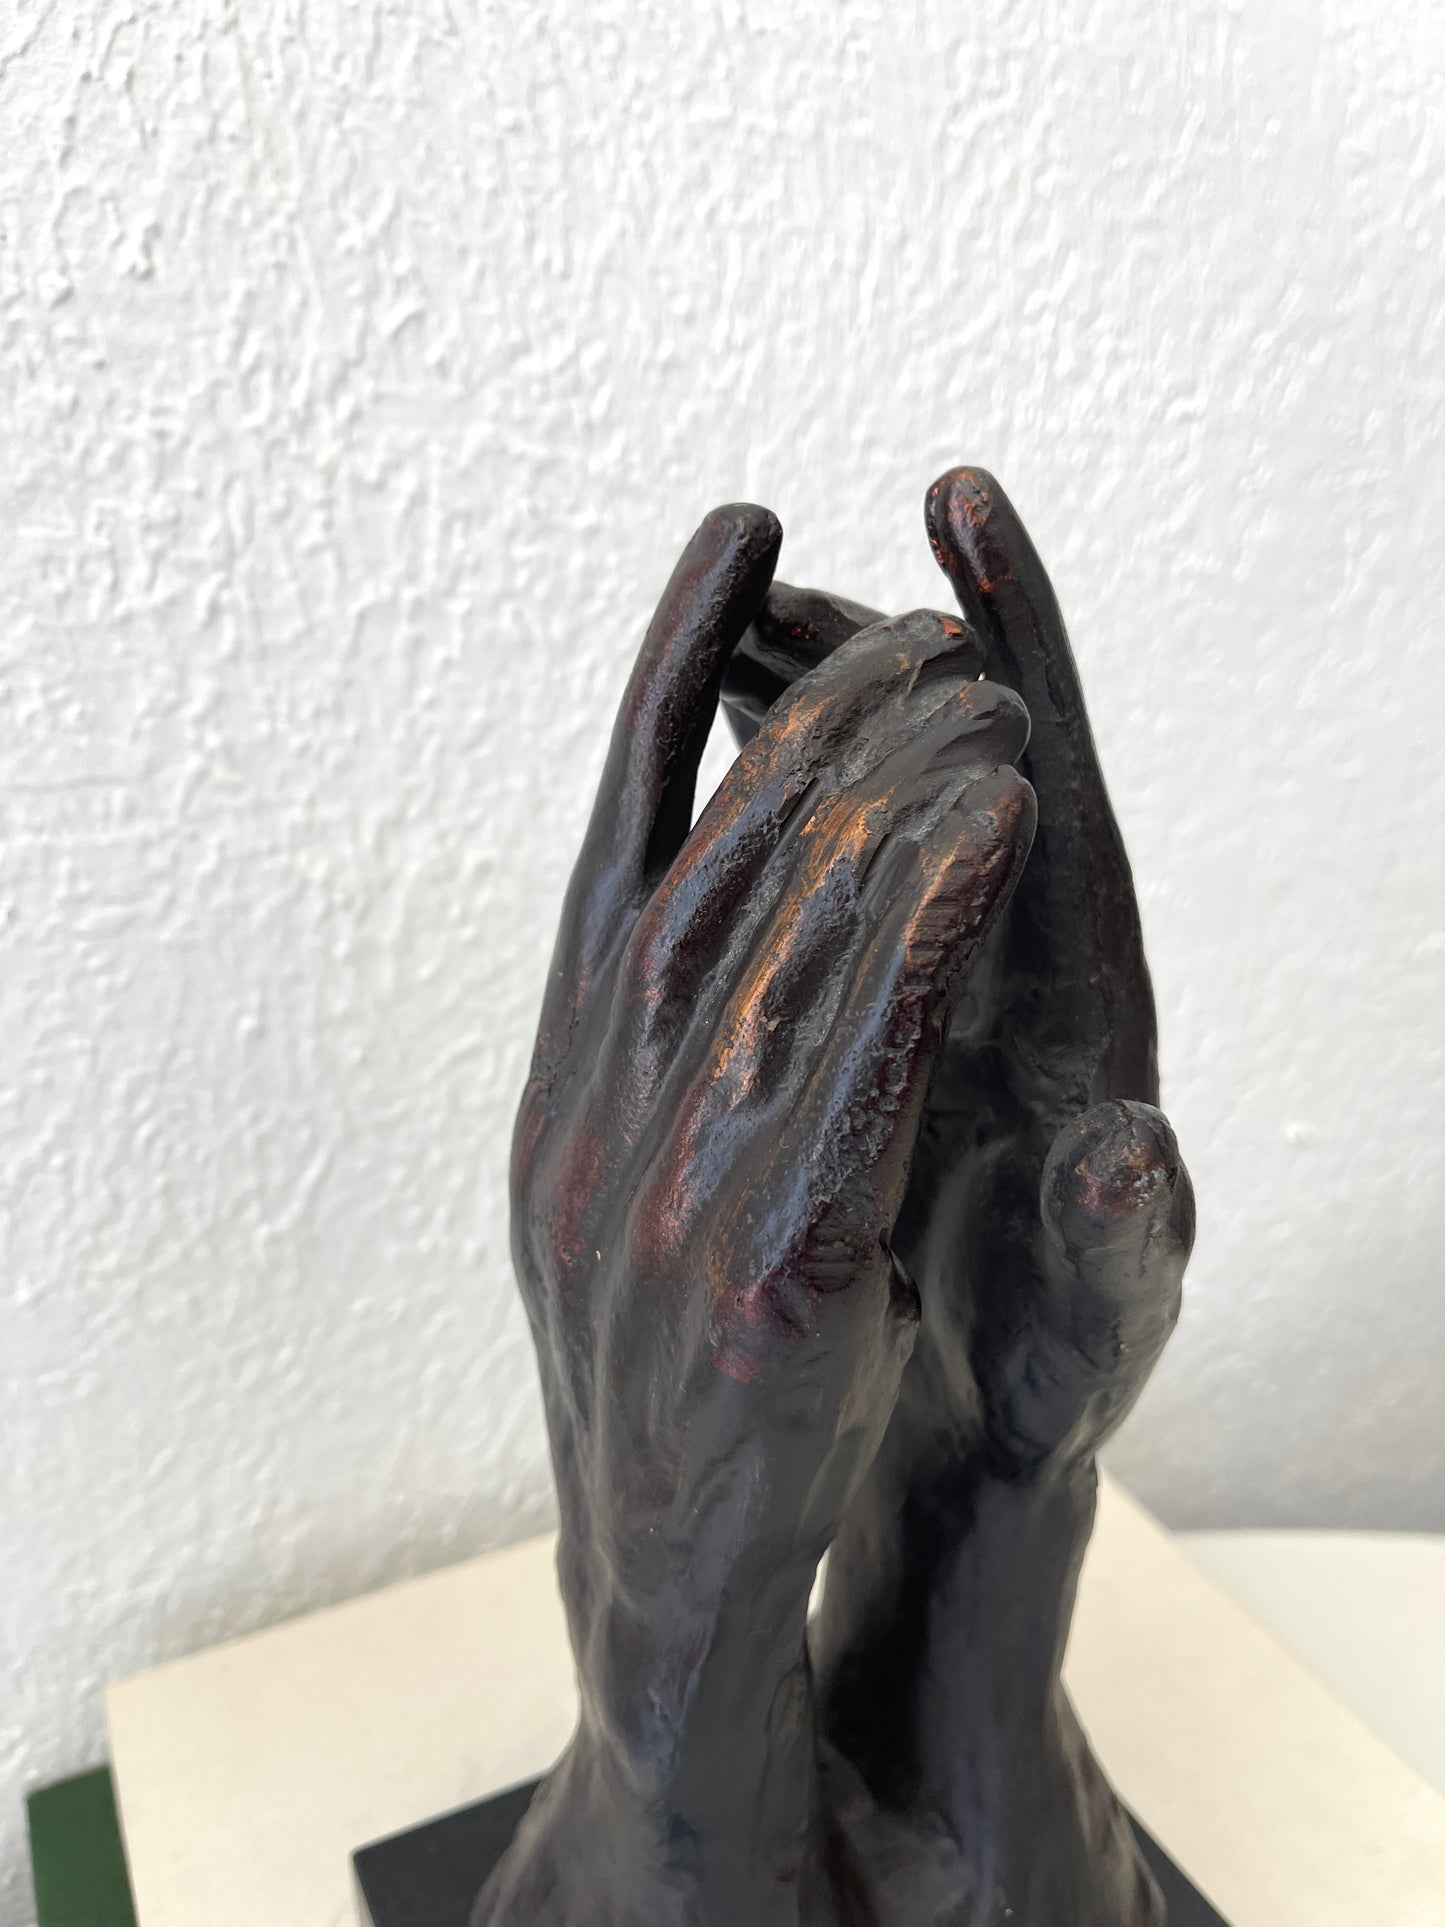 Vintage Auguste Rodin reproduction metal bronzed hand sculpture on marble base